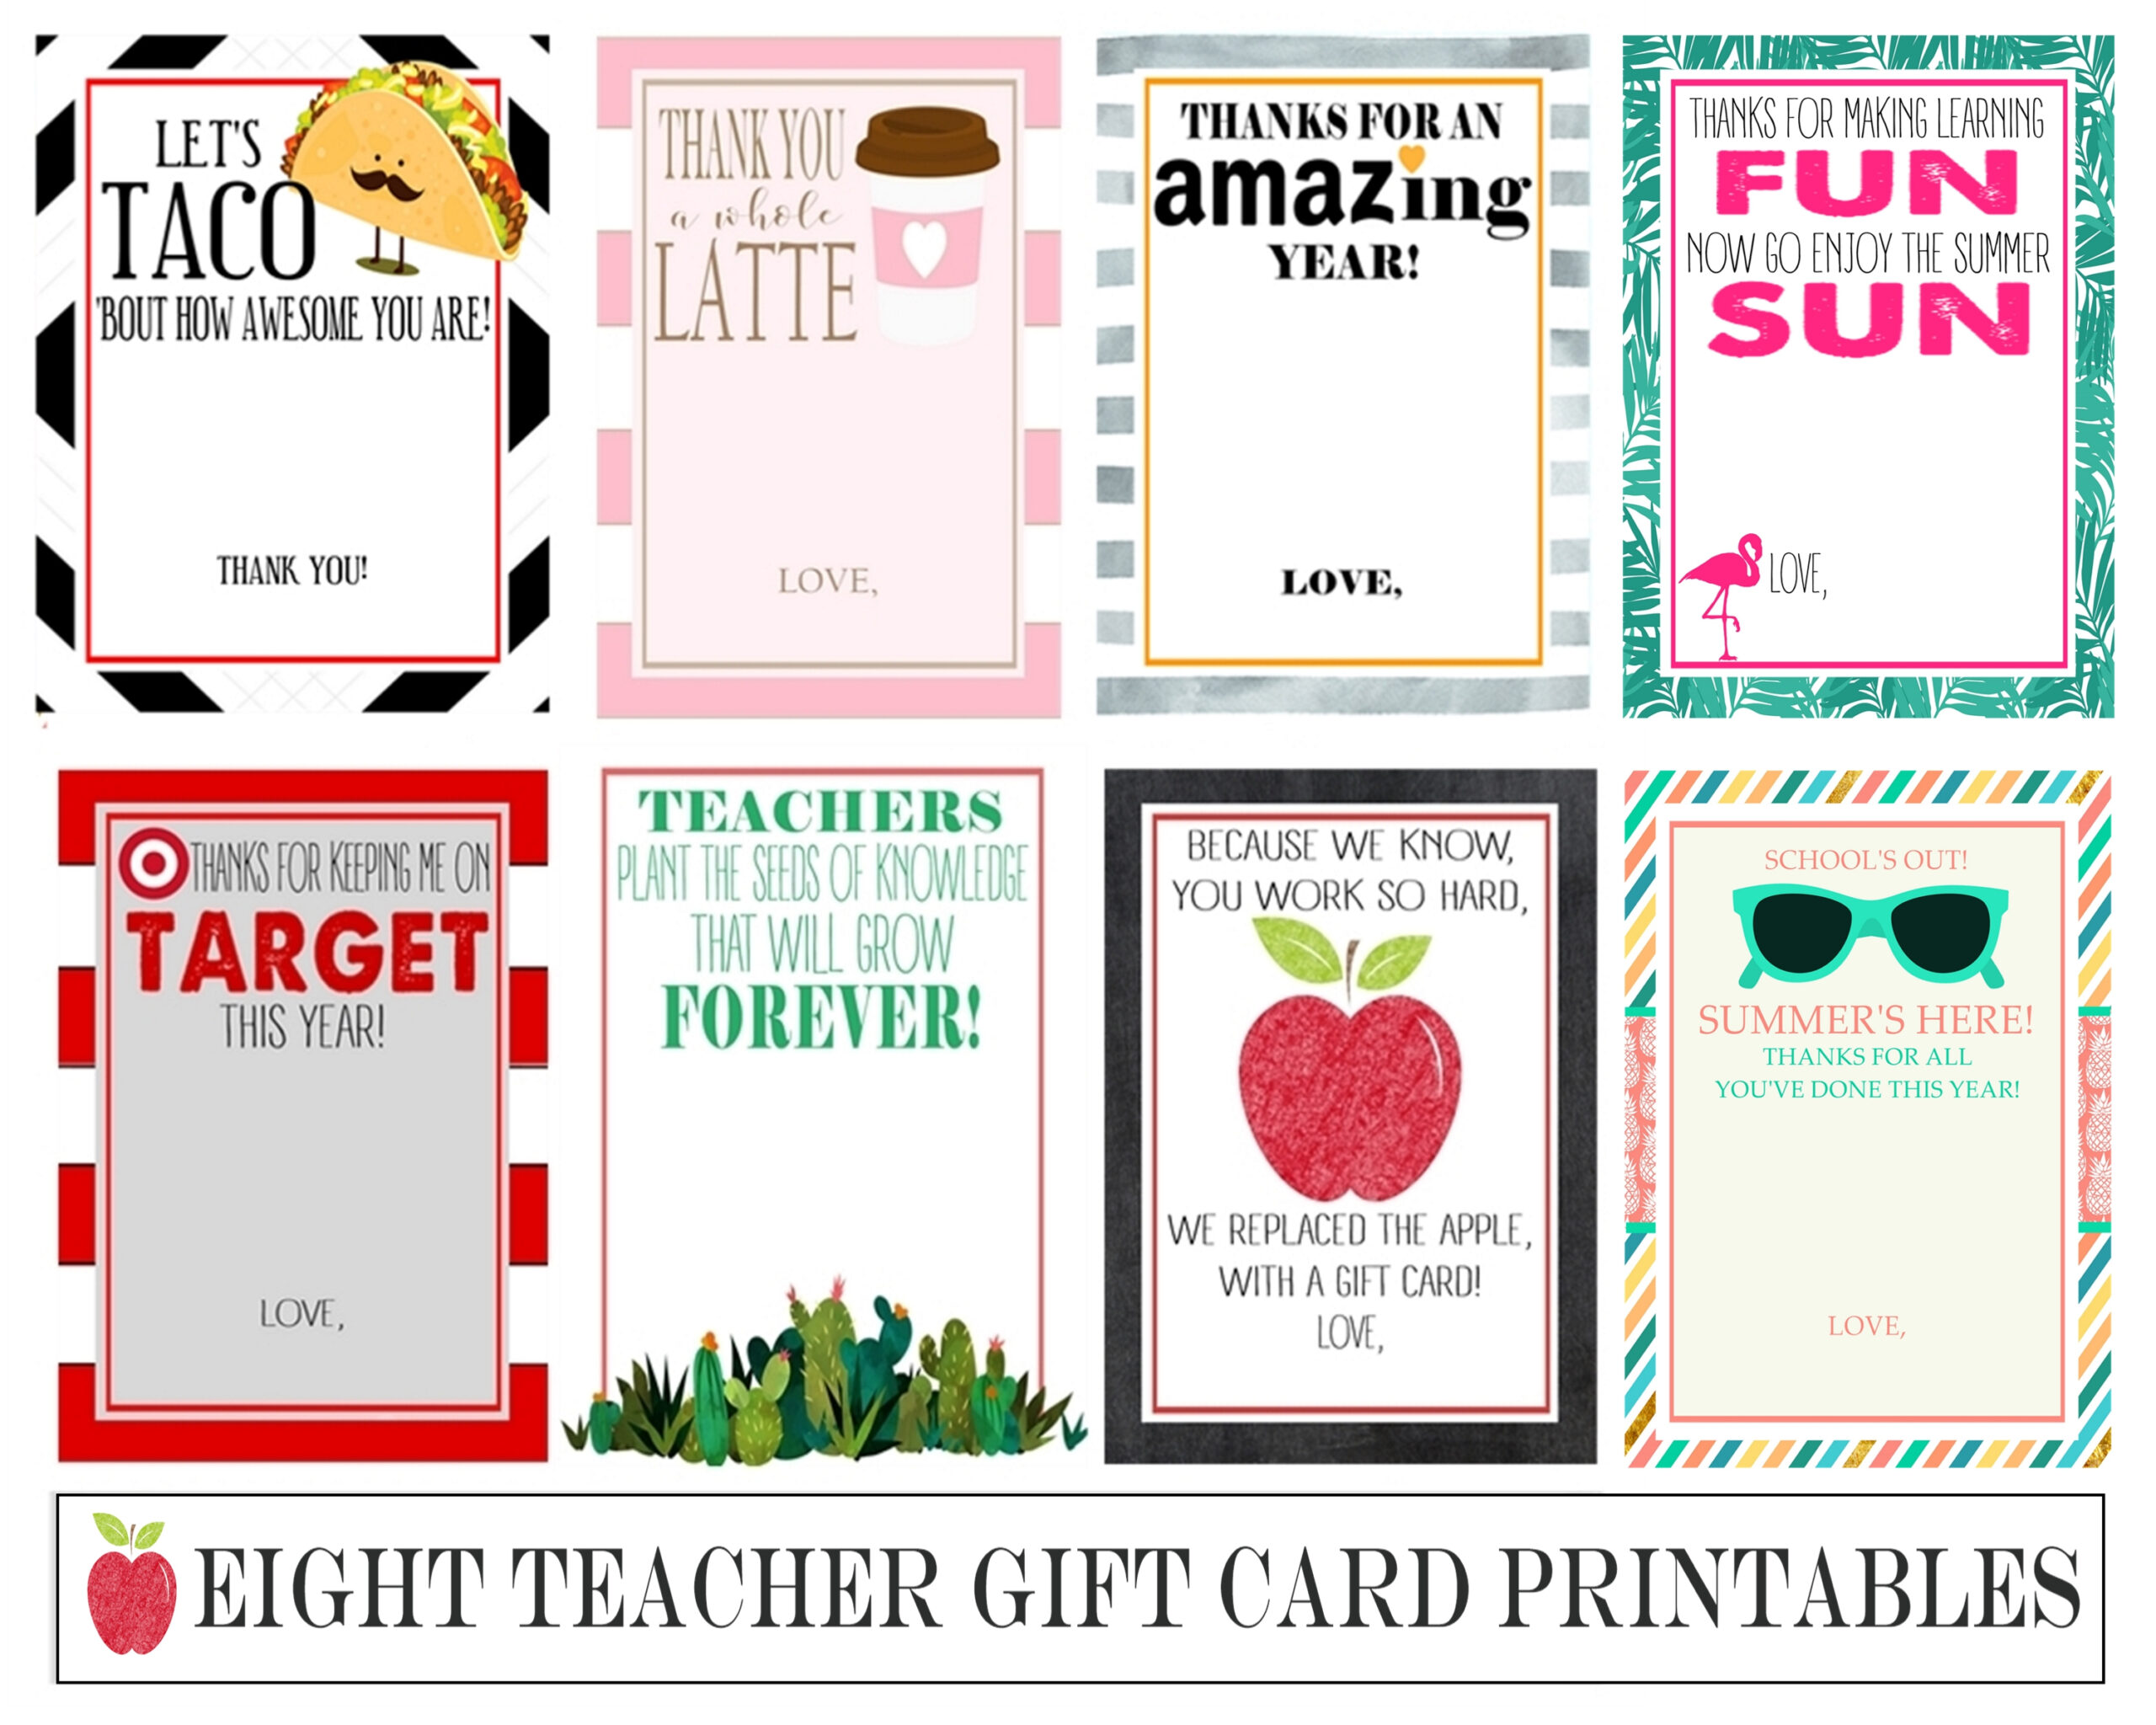 25 Electronic Gift Card Options And 8 Teacher Gift Card Printables - Gift Cards Free Printables